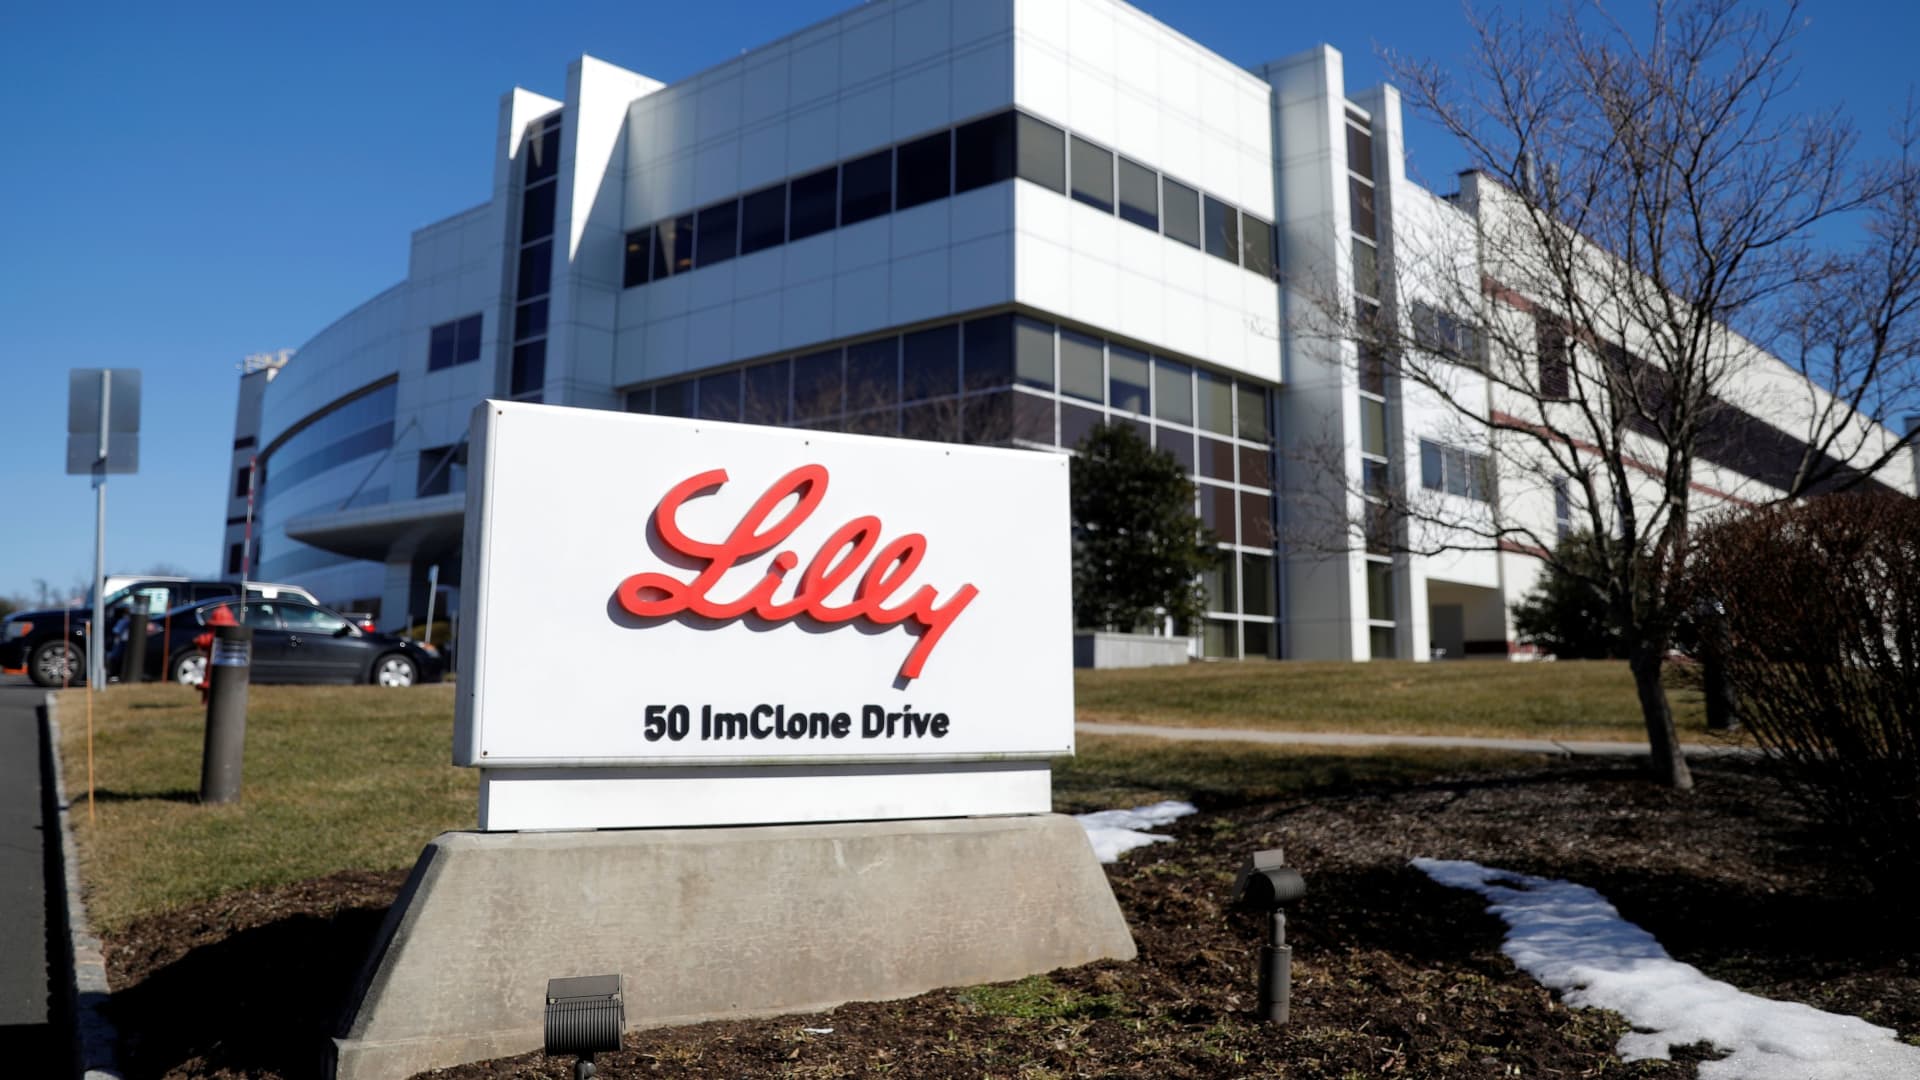 Uninsured Americans pay high costs for an insulin Eli Lilly vowed to price at $25, Sen. Warren says 